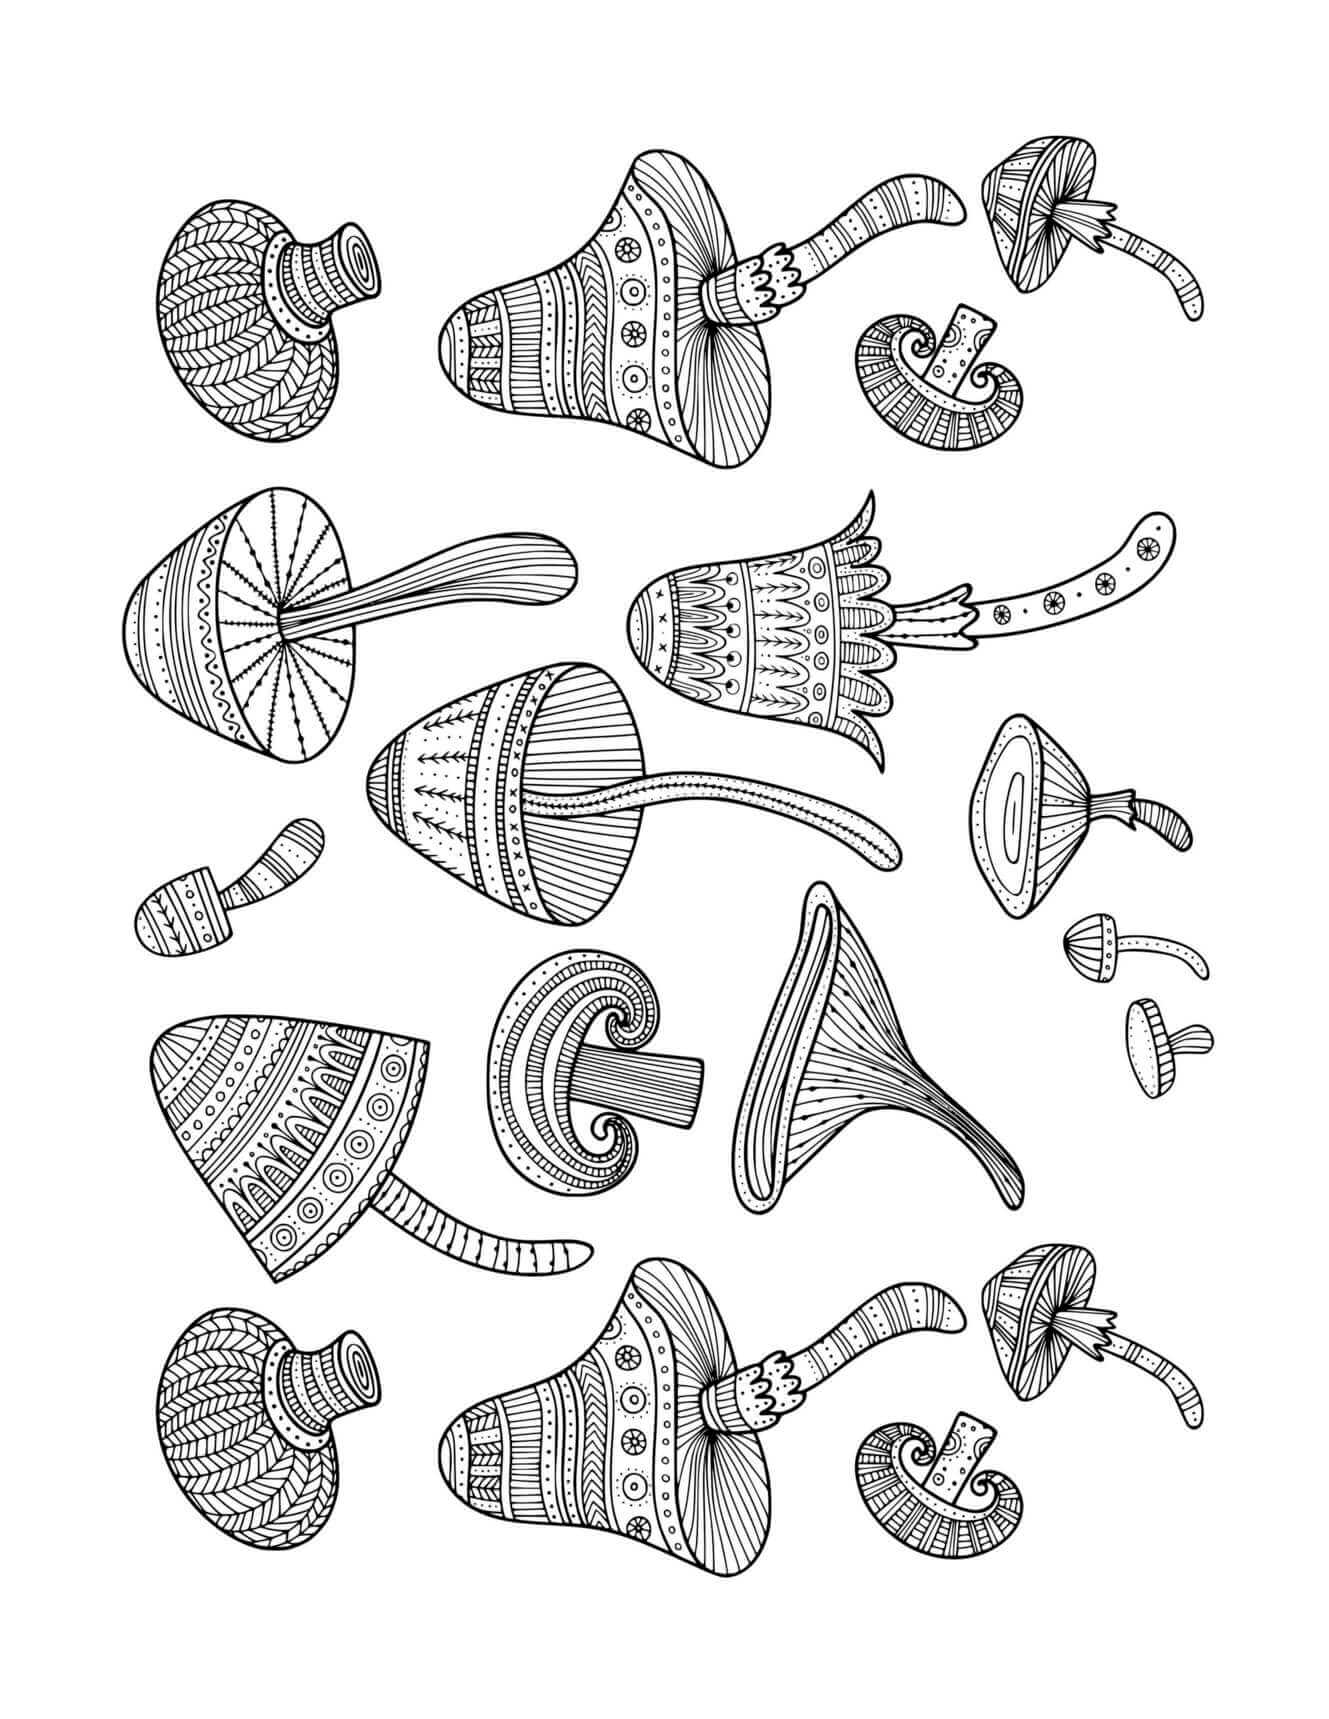 Fall Patterned Mushrooms For Adults To Color